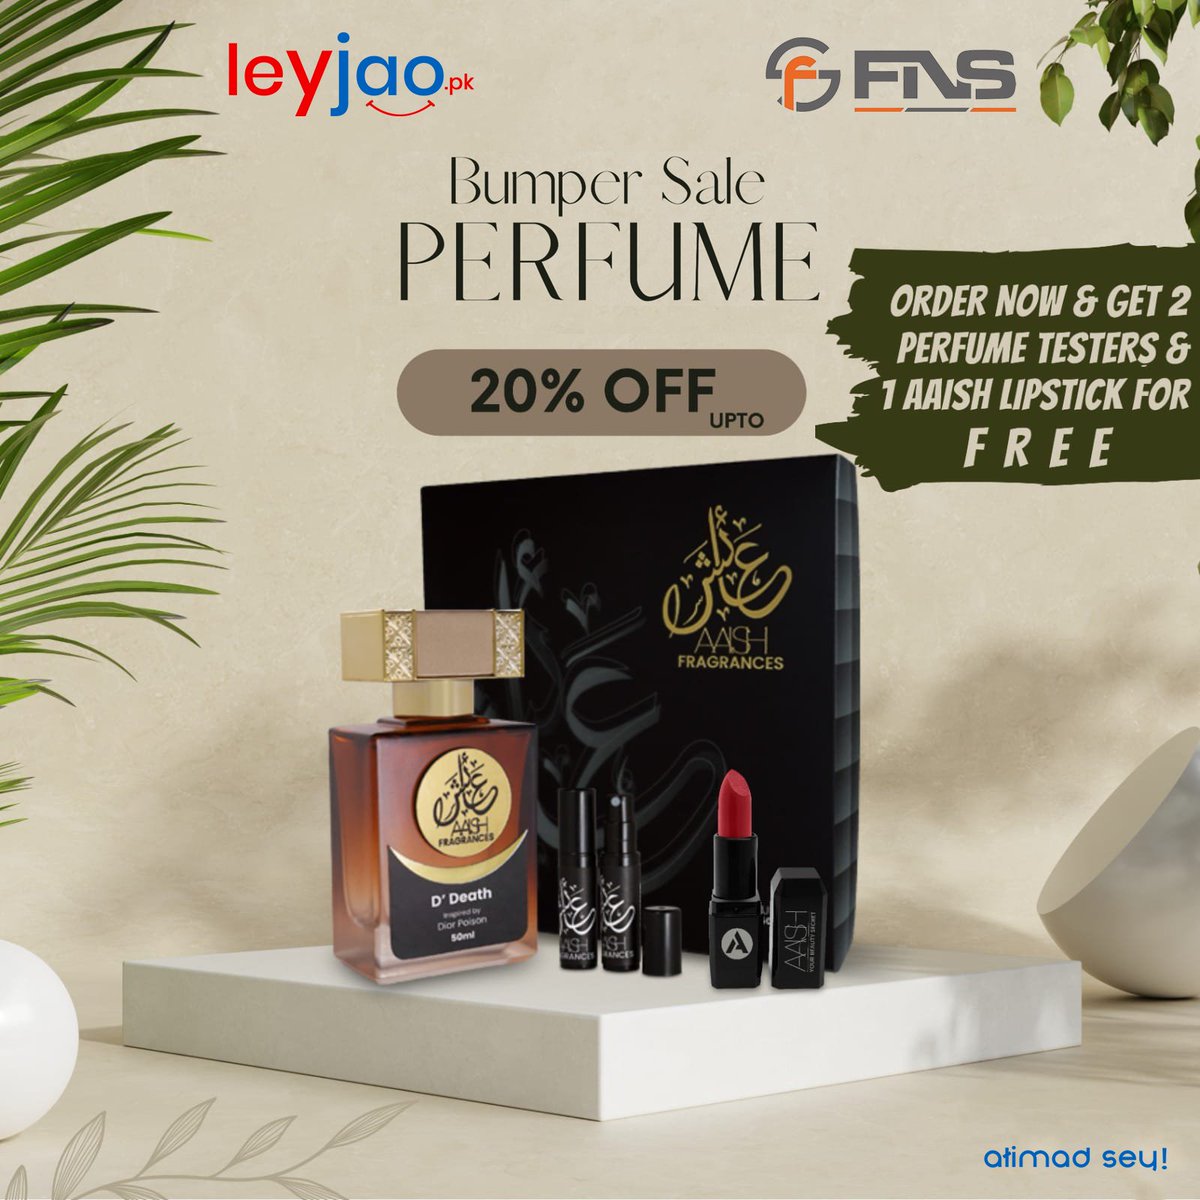 Order now AAISH Fragrances Perfume D’ Death today and get 2 Perfume Testers and 1 AAISH Lipstick for free. Avail this limited time offer and enjoy this bumper sale!

Visit 🛒: bit.ly/42D9vbU

#Leyjao #AtimadSey #AmazingDiscounts #discountoffer #shoponline #limitedstock